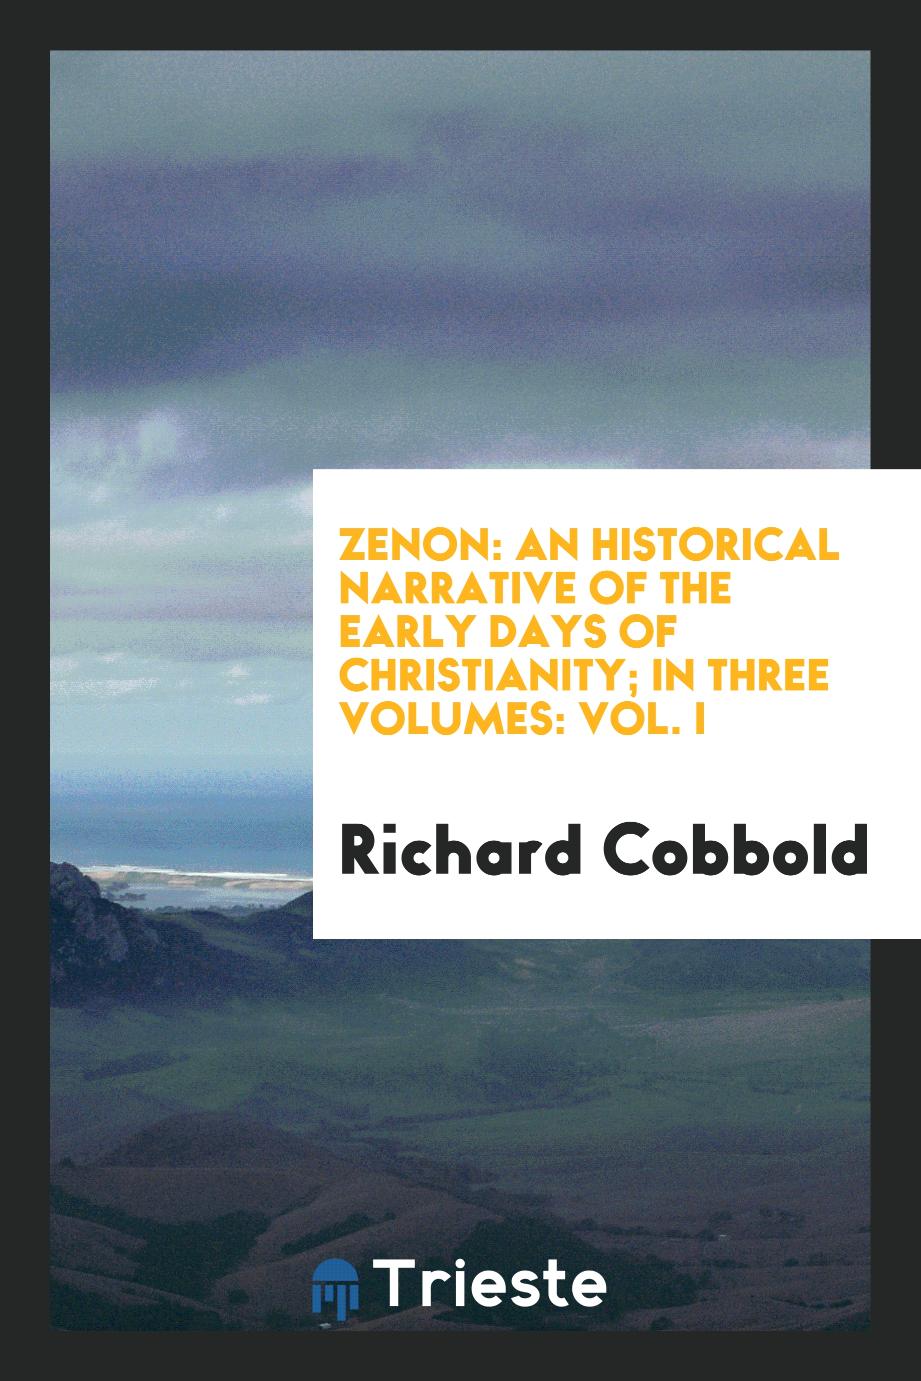 Zenon: an historical narrative of the early days of Christianity; in three volumes: Vol. I